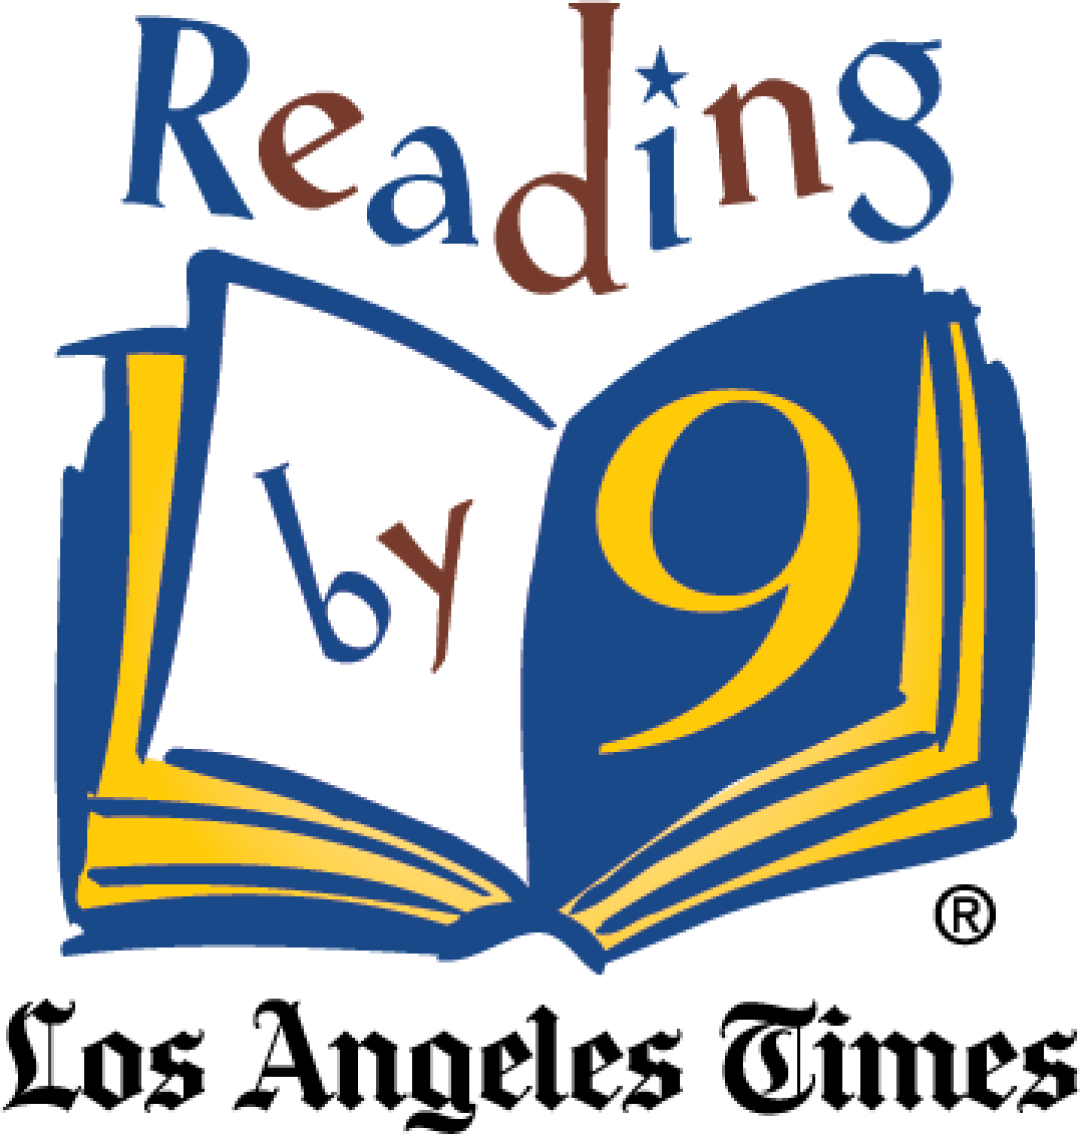 The Los Angeles Times Reading by 9 logo